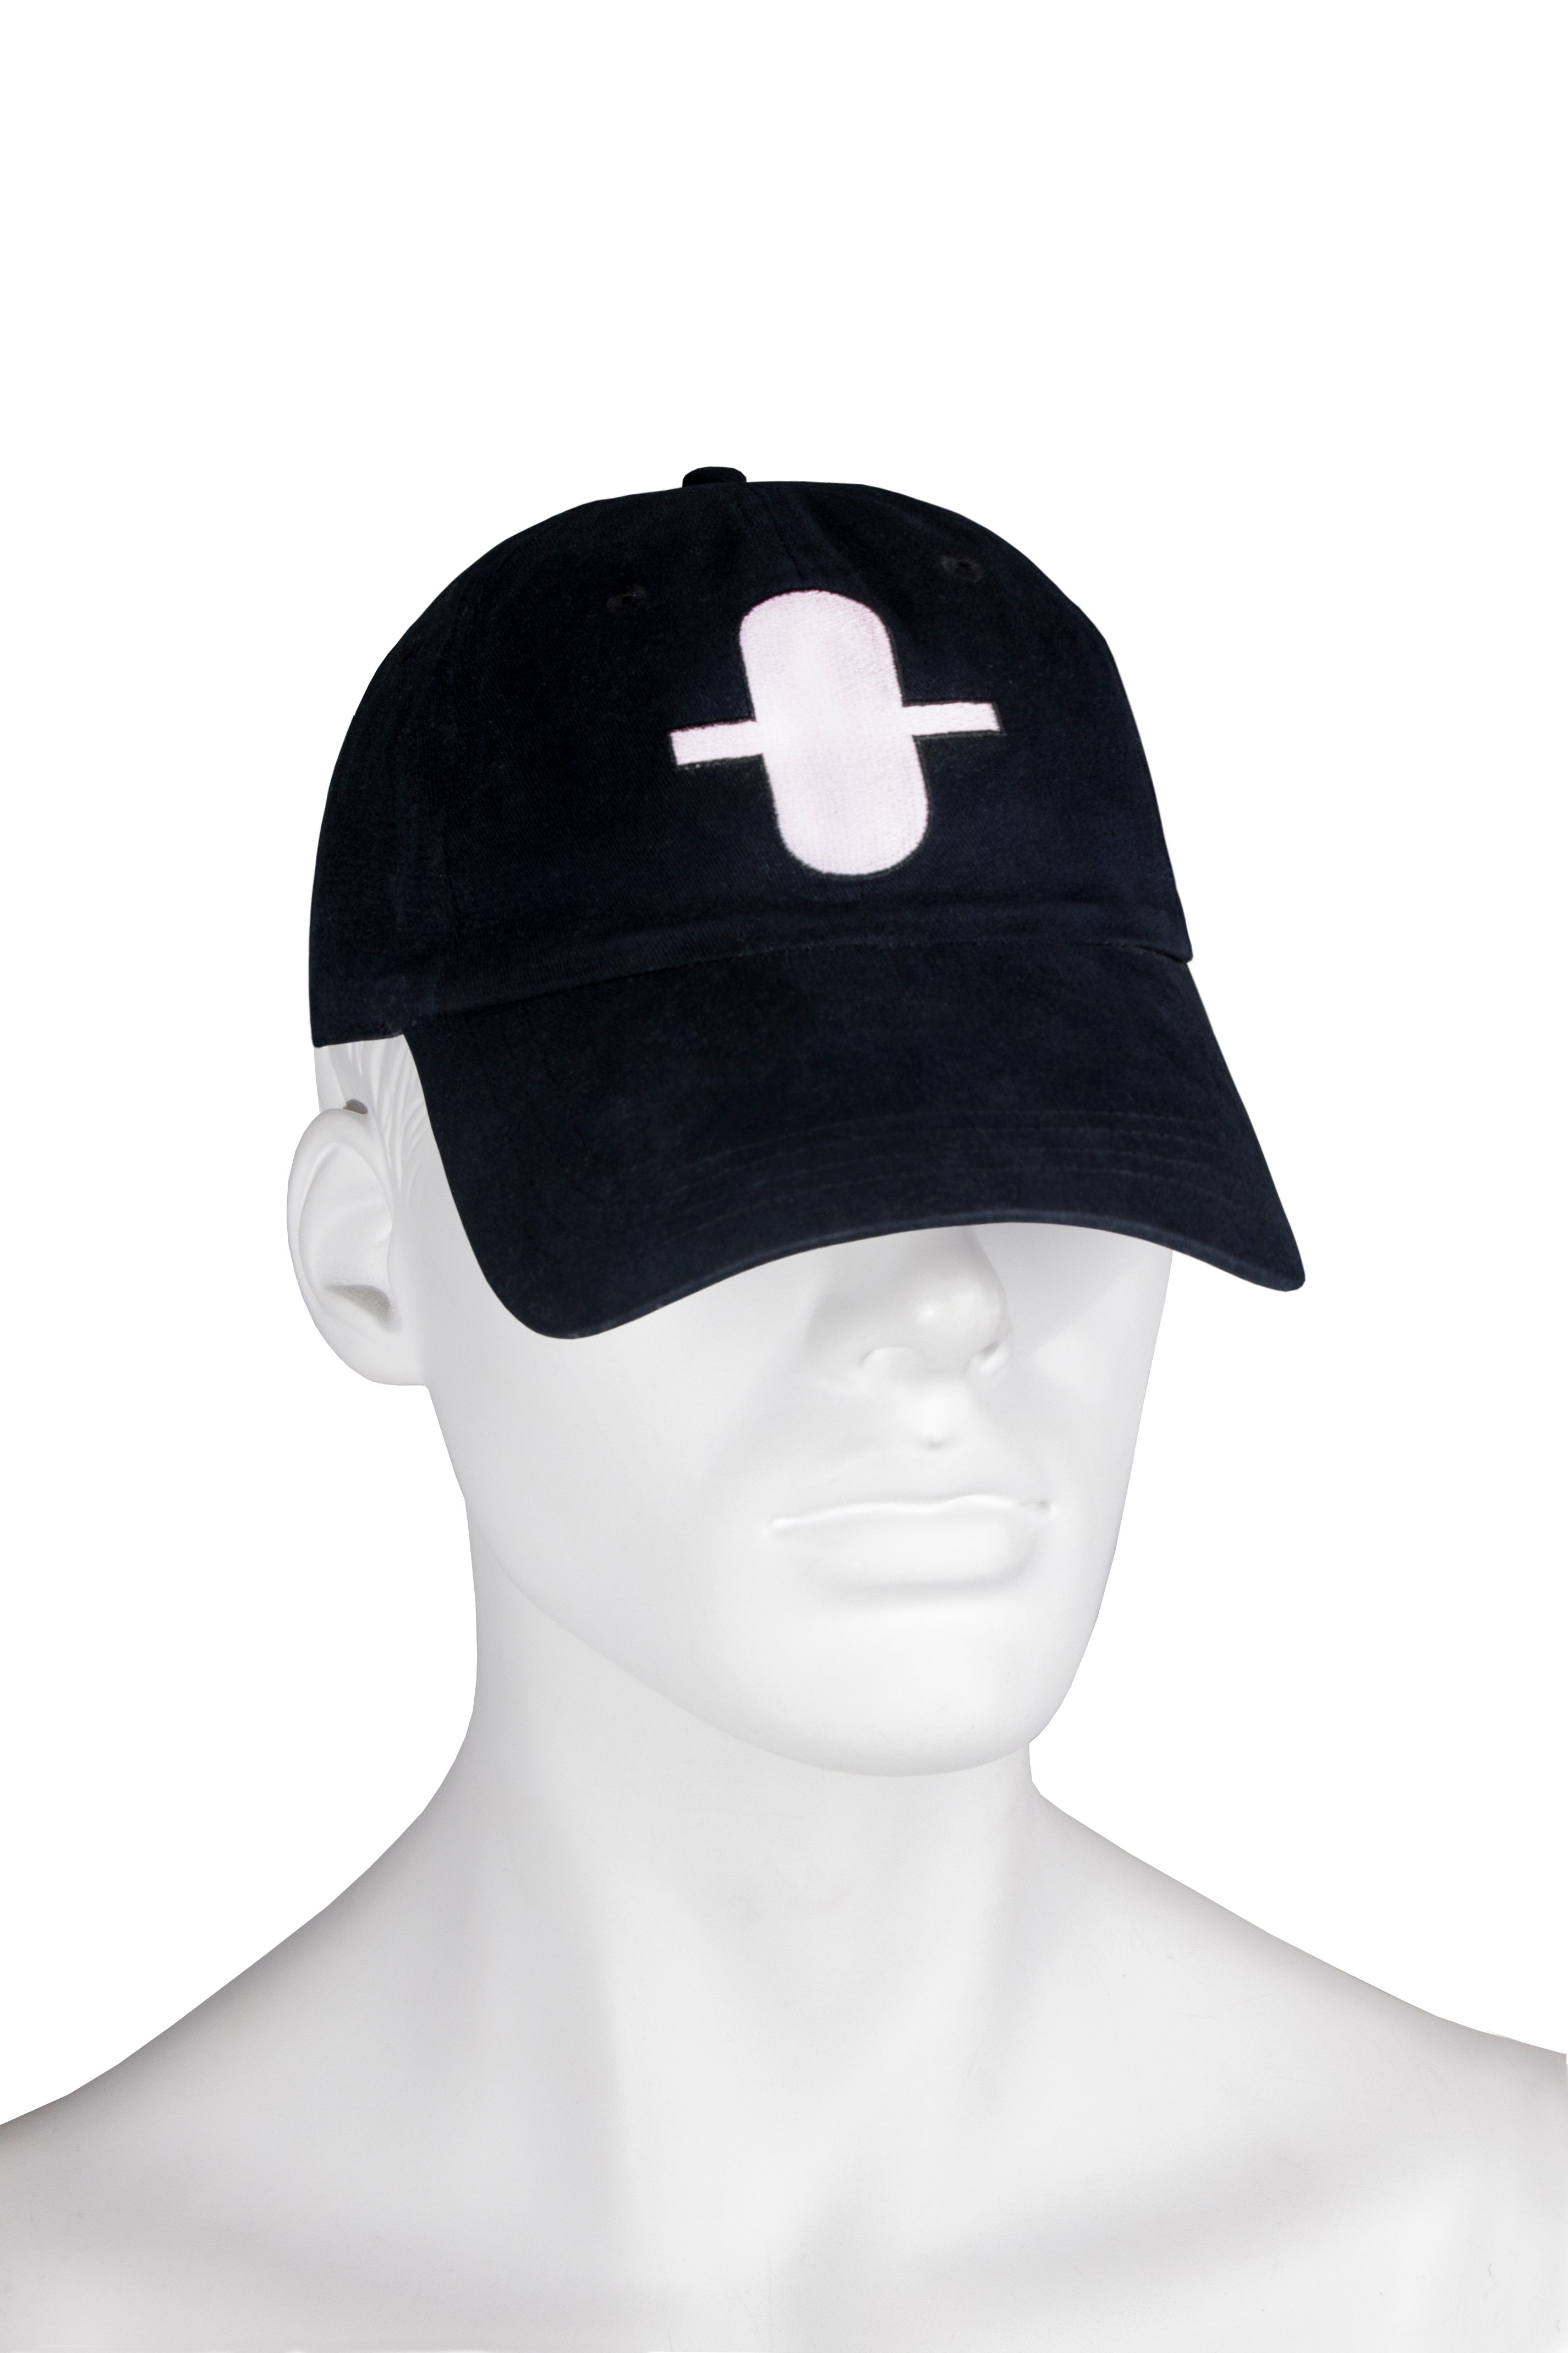 A Matthew Barney Cremaster Cycle cap, circa 2002. This incredibly rare hat was made in a limited edition for The Cremaster Cycle (1994-2002) exhibit at the Guggenheim Museum. It prominently features the artist's iconic insignia named the 'Field